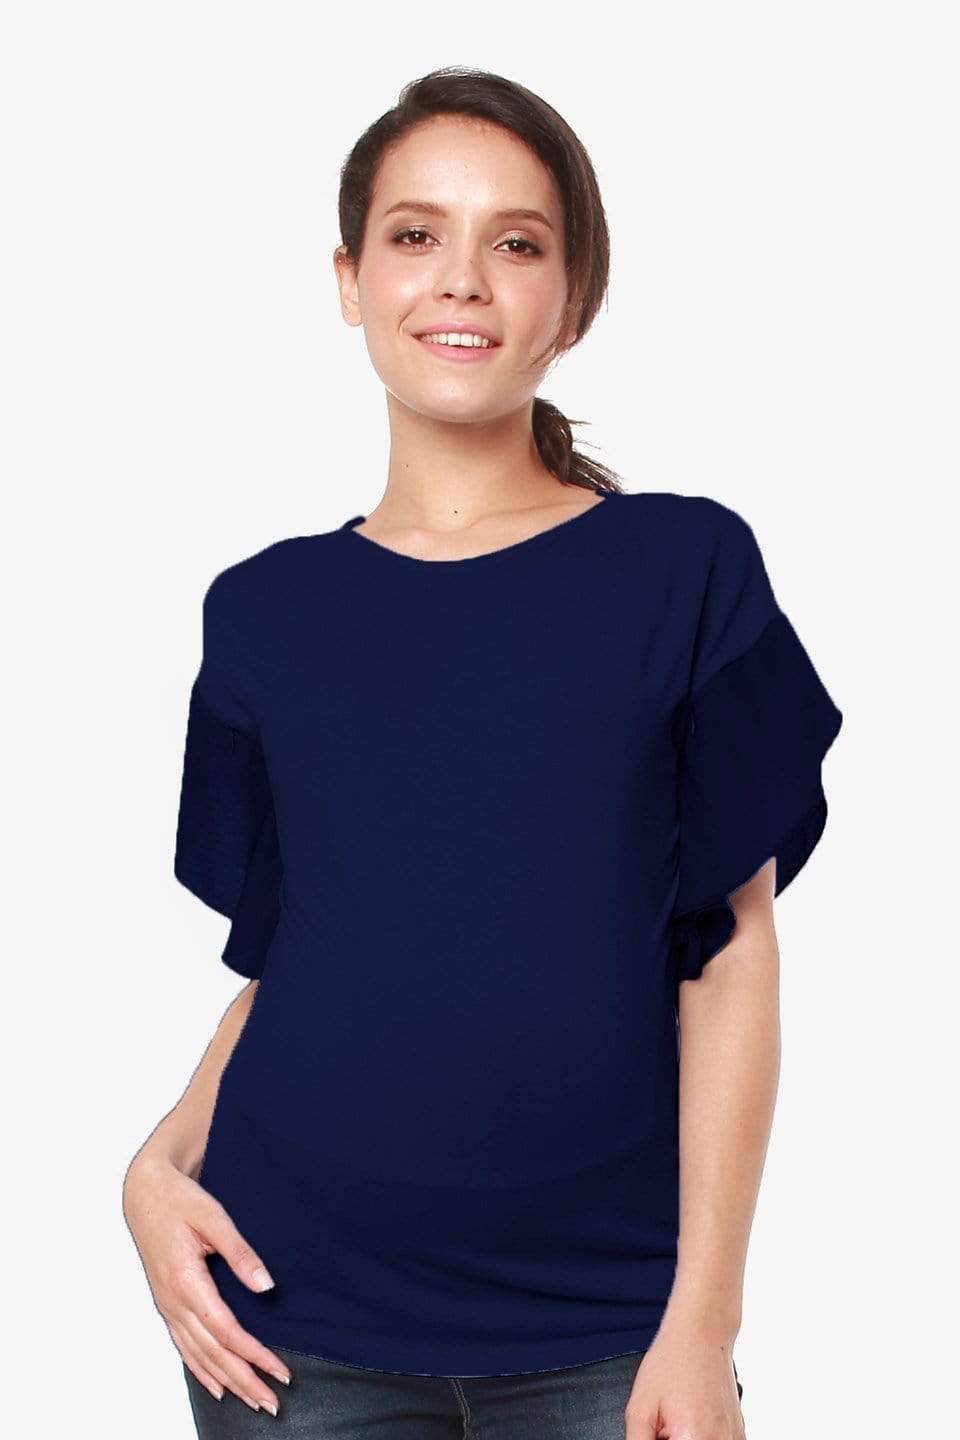 Shop Online: Maternity Clothes and Nursing Tops - Spring Maternity Singapore